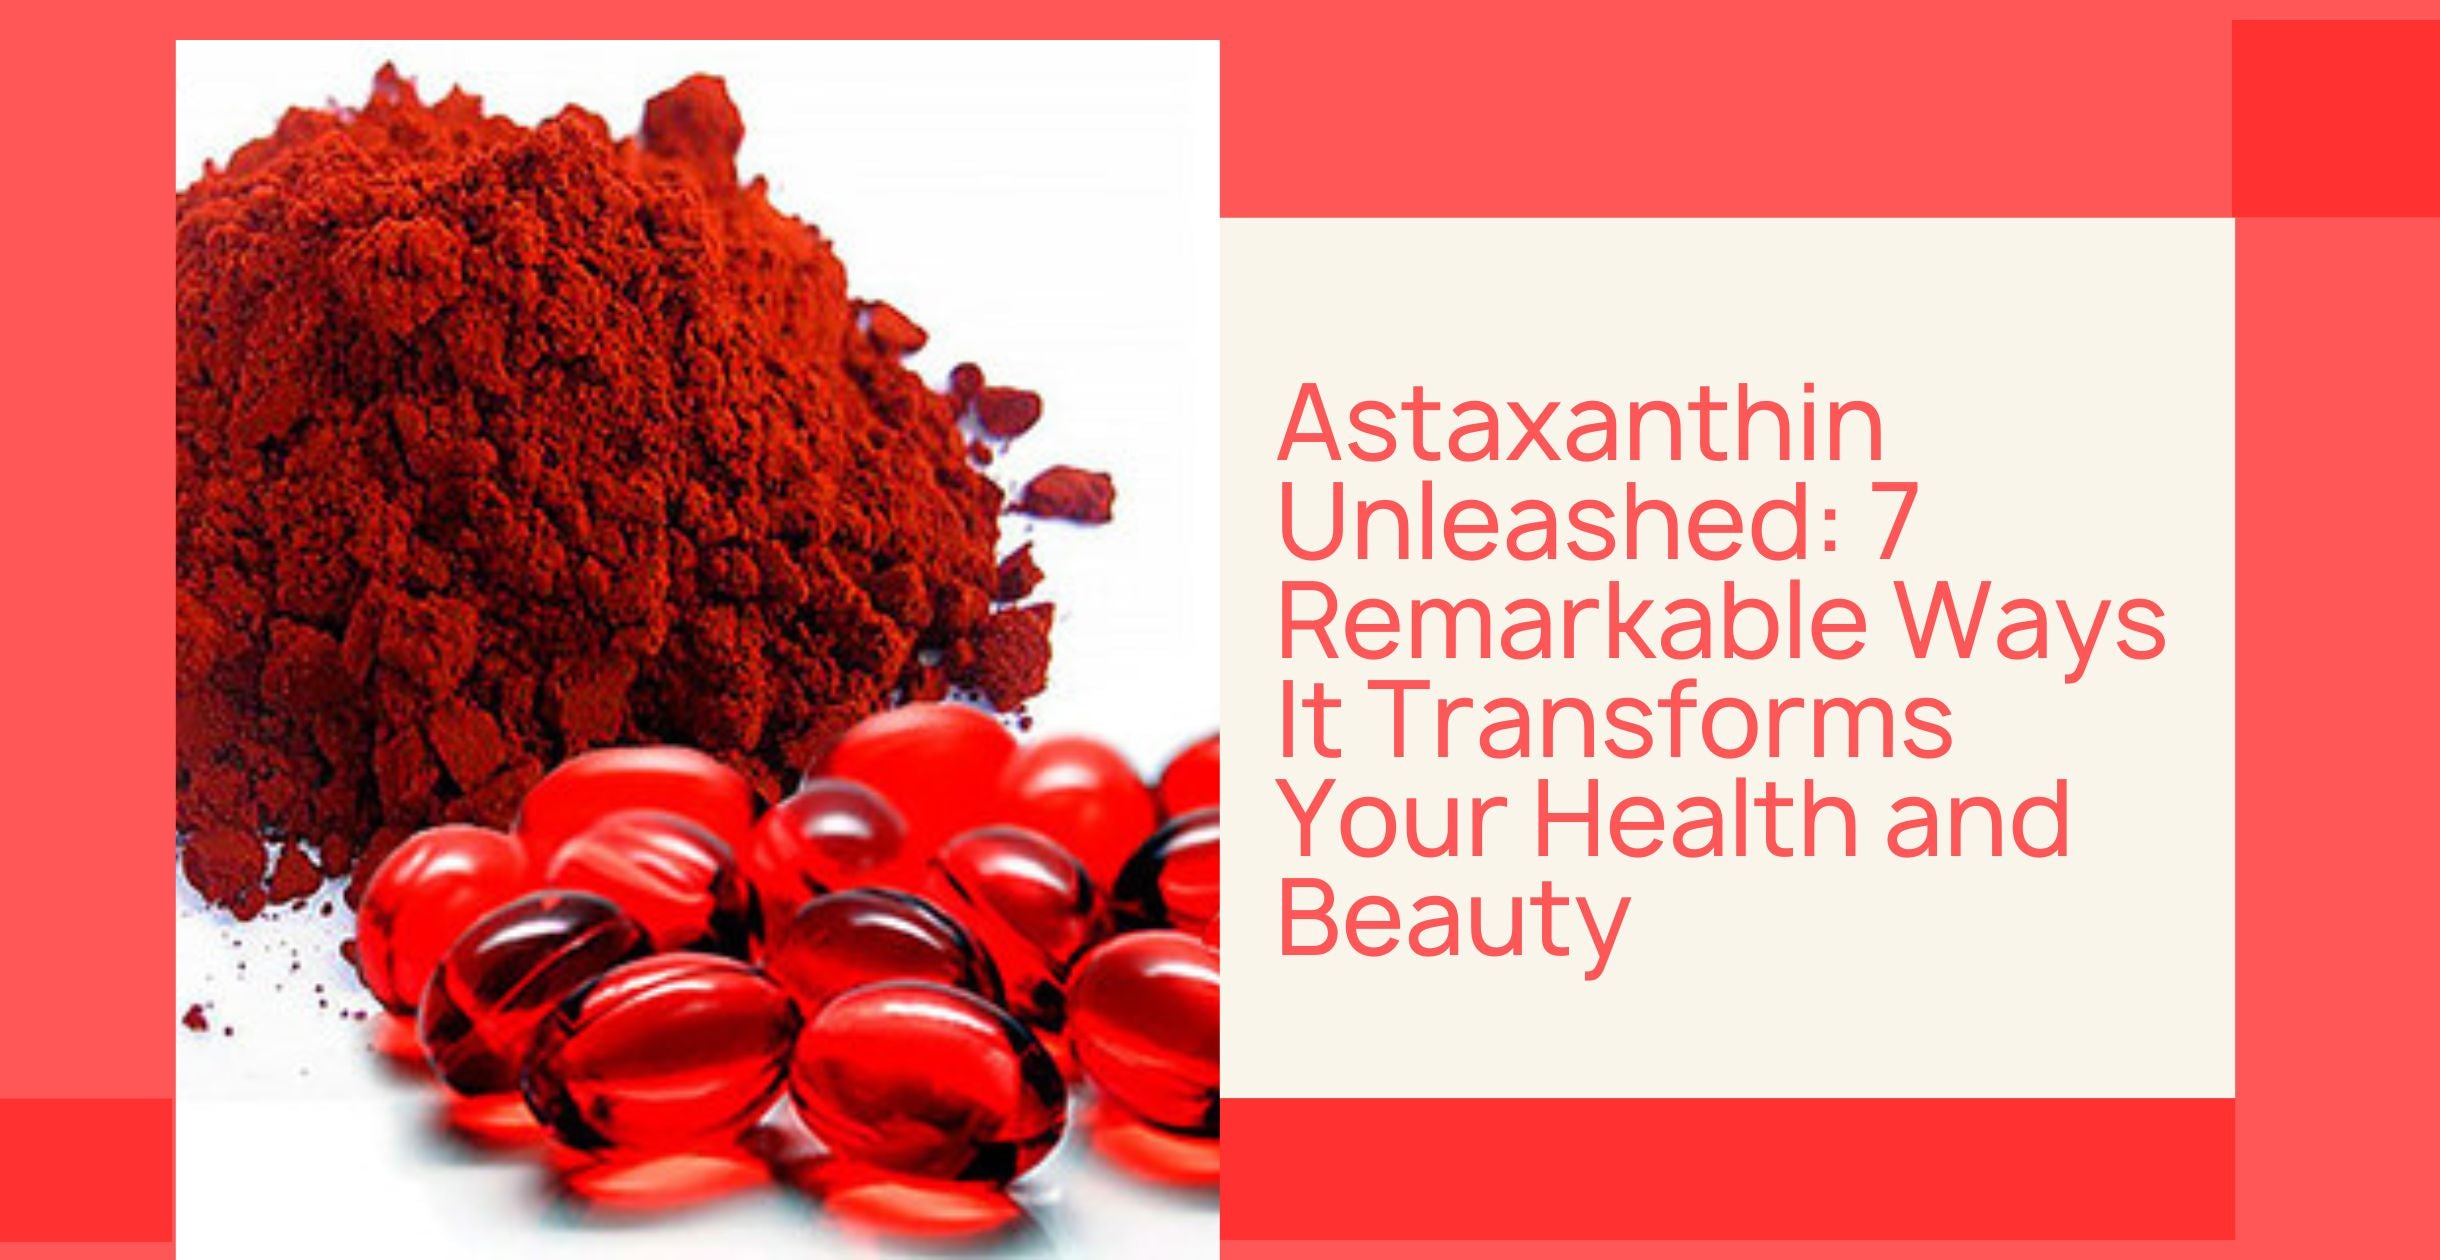 Astaxanthin Unleashed: 7 Remarkable Ways It Transforms Your Health and Beauty